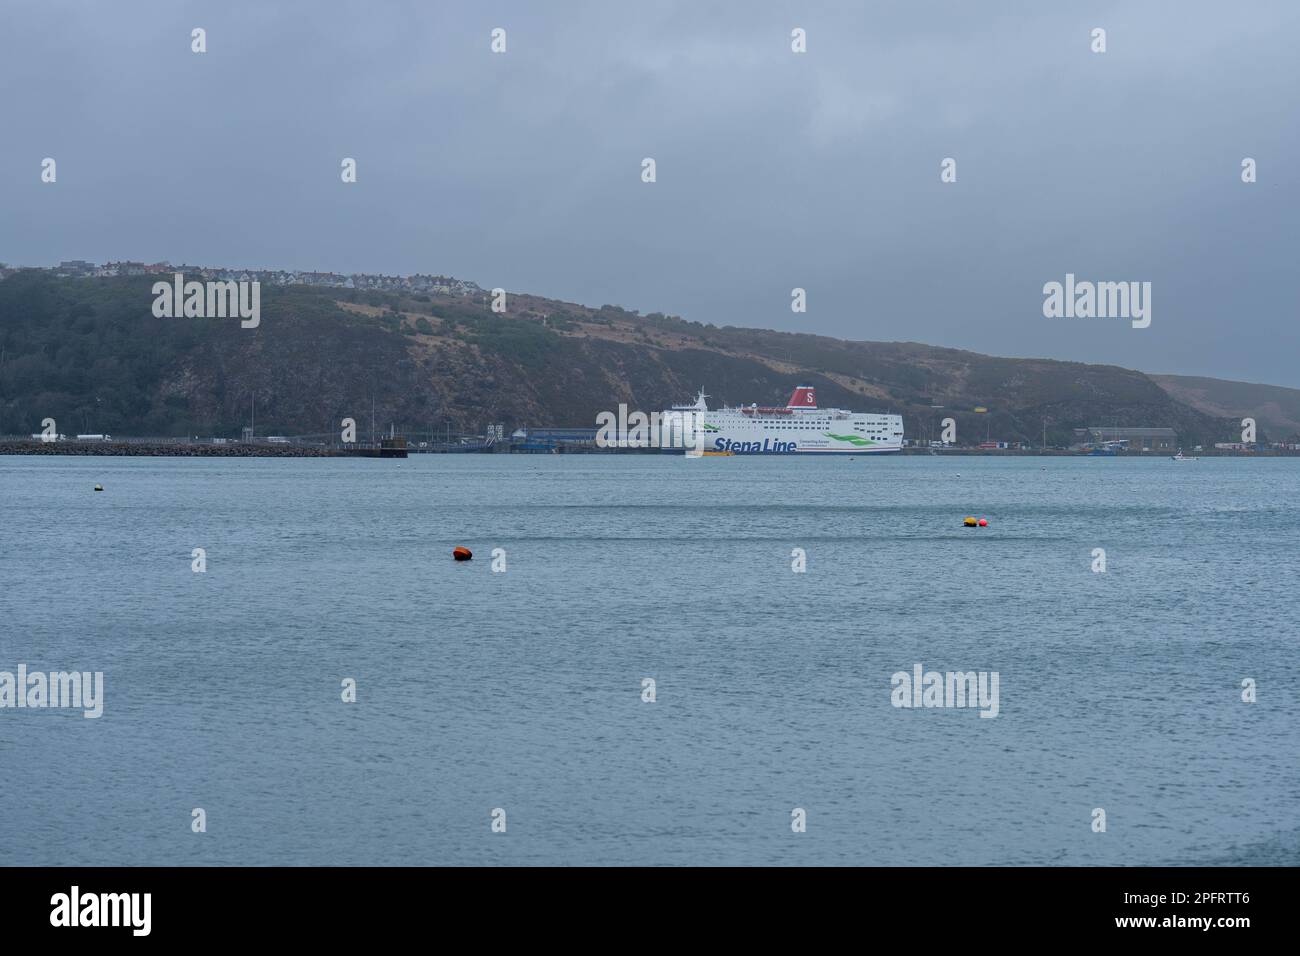 View of Fishgaurd harbour with Stenna Line ship in distance Stock Photo